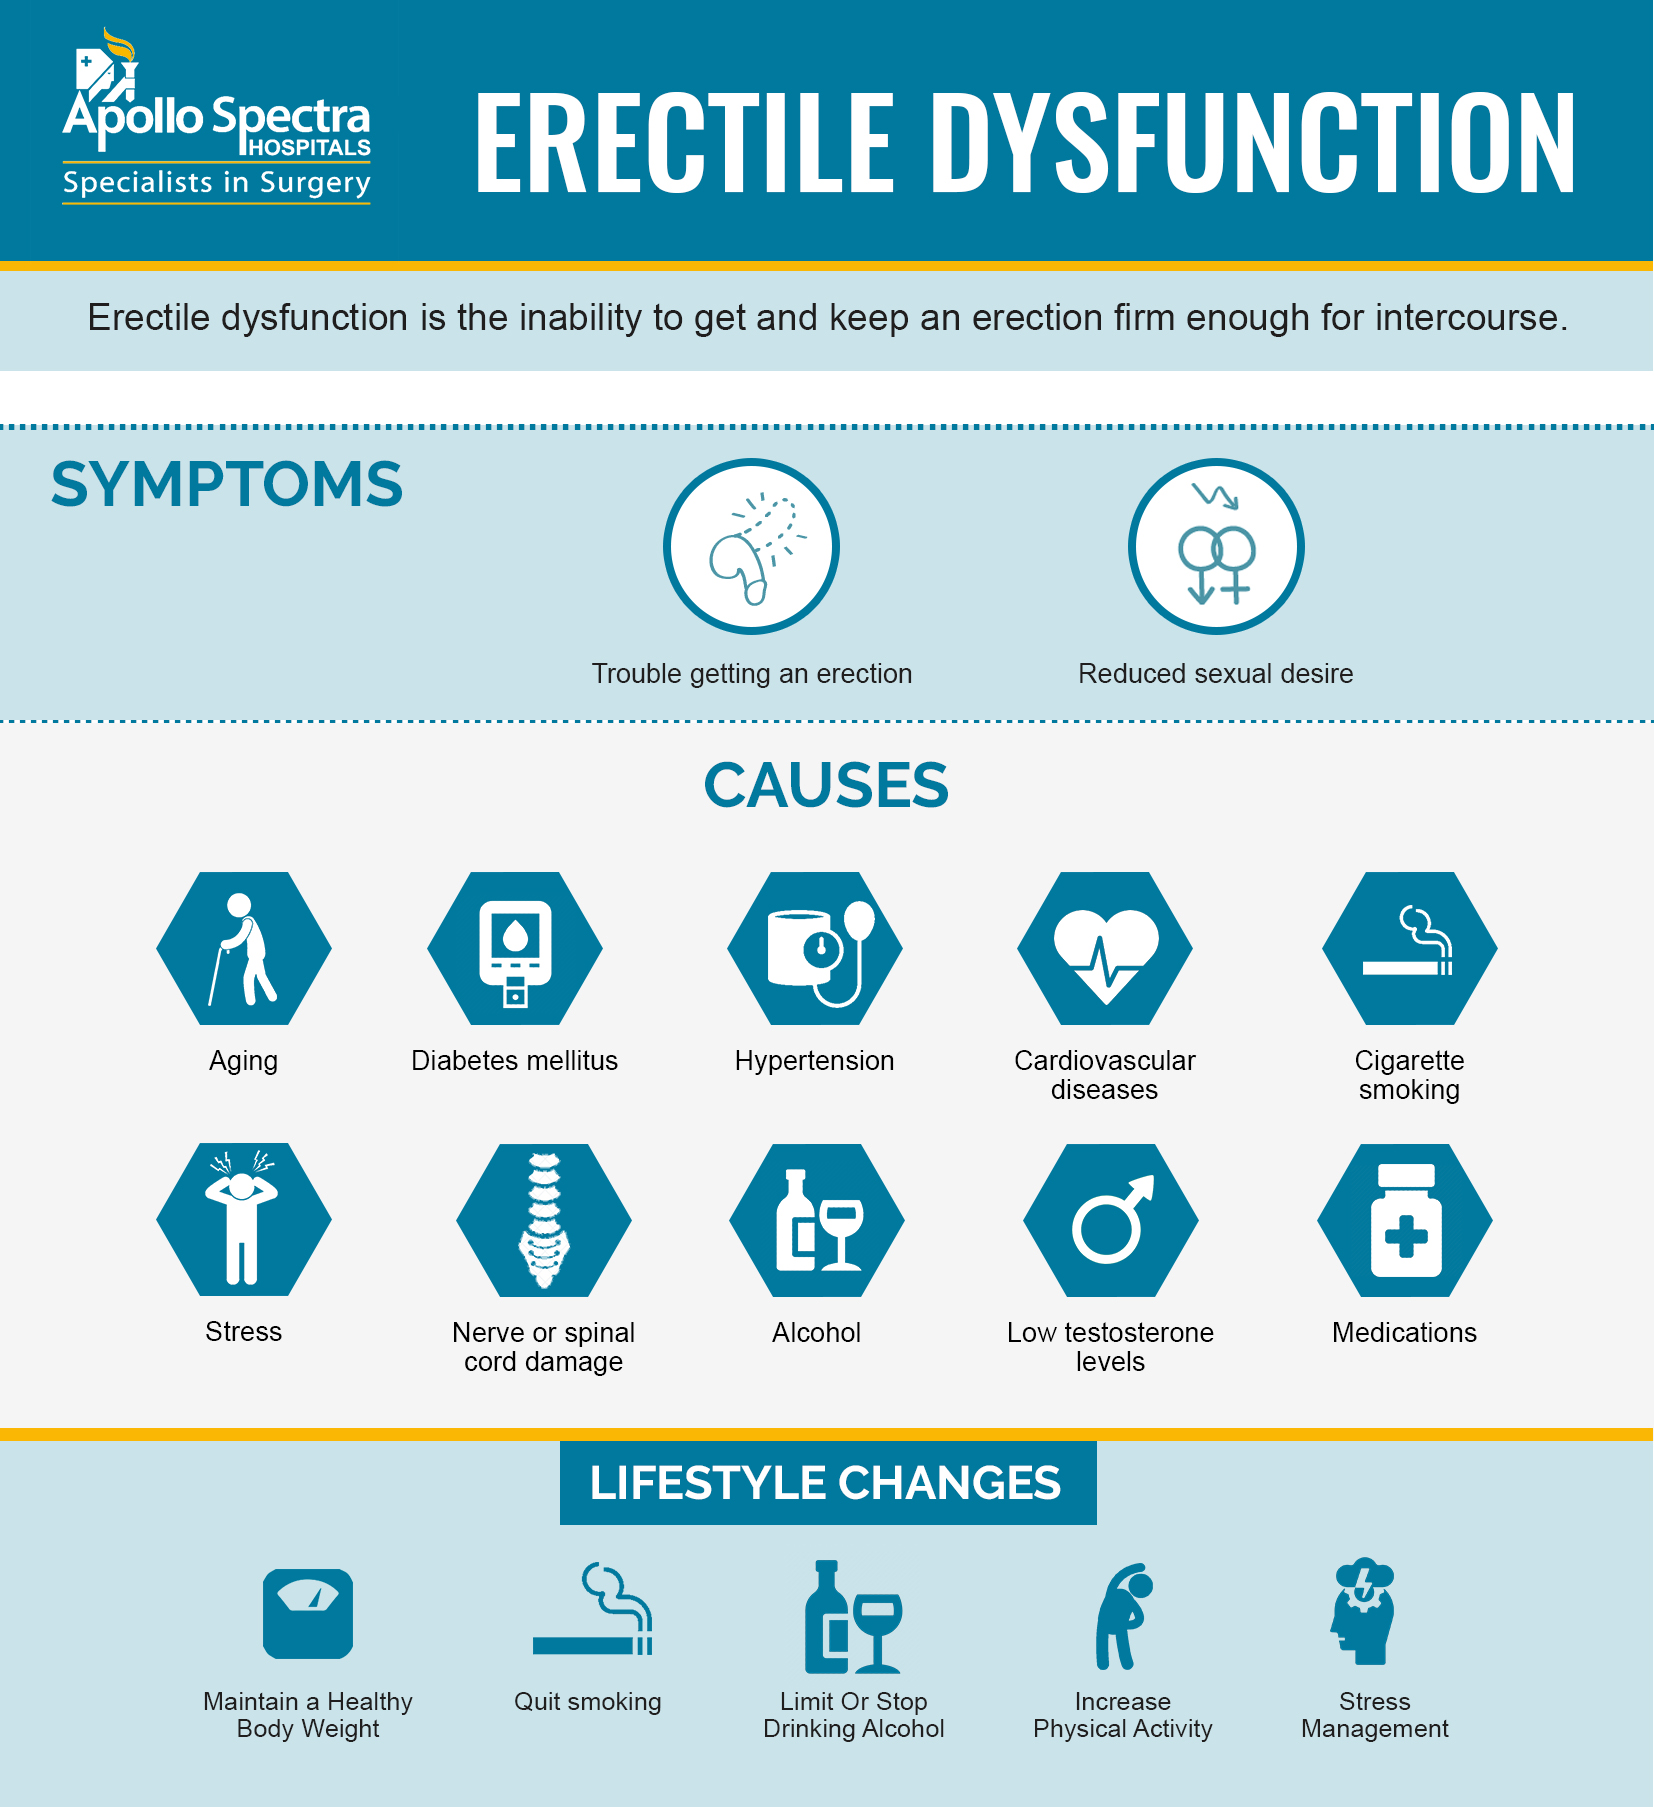 What Are The Causes And Treatment For Erectile Dysfunction